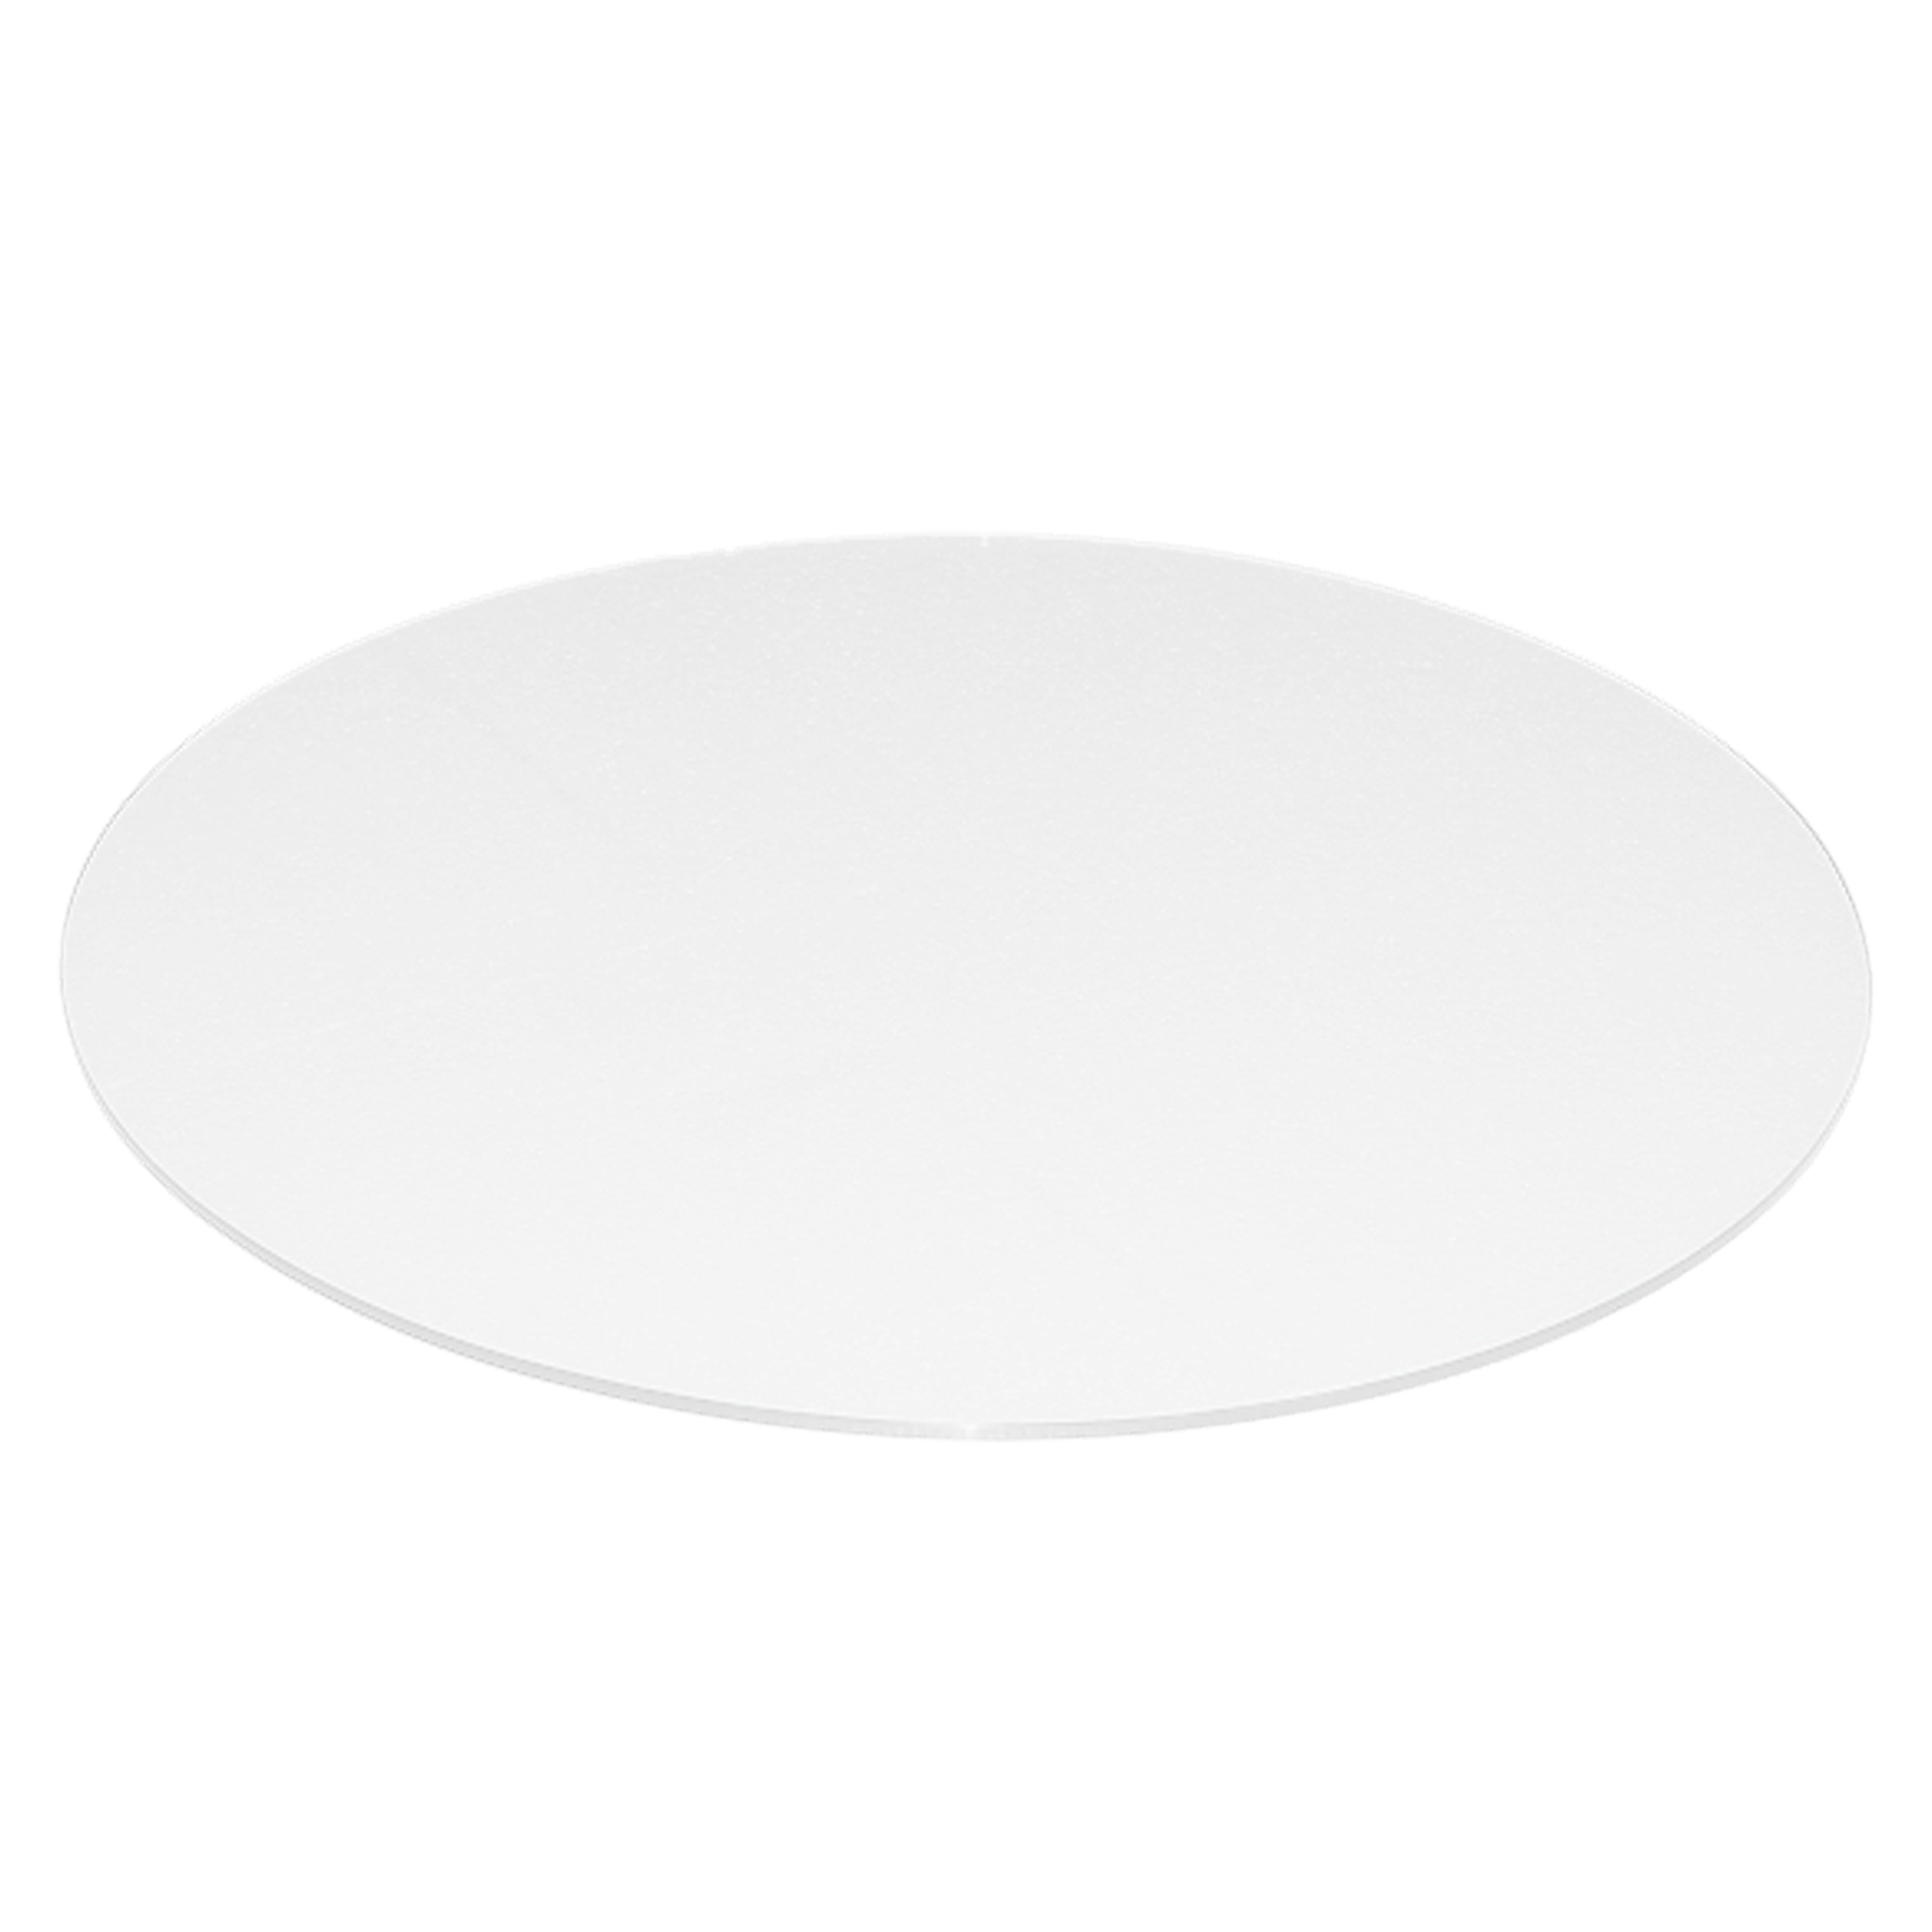 Glass Table Top 28 White Round Back, 28 Round Tempered Glass Table Top